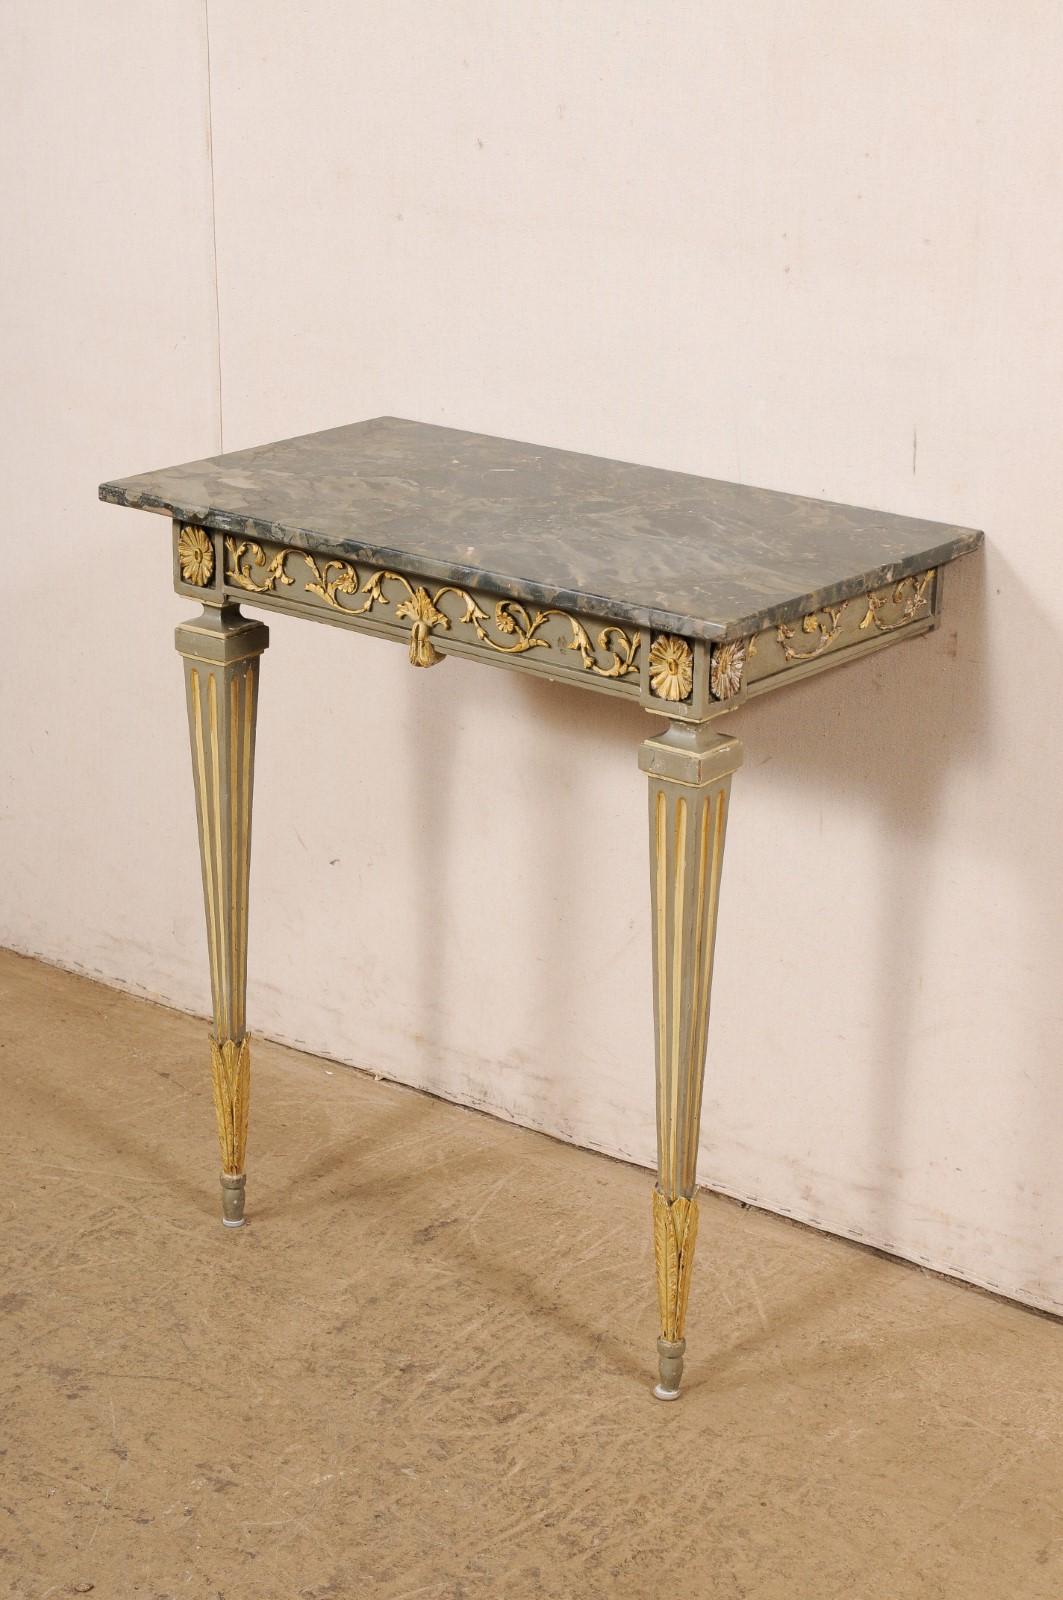 Italian 19th C. Two-Leg Carved & Gilt Wood Wall Console w/Green Marble Top For Sale 4